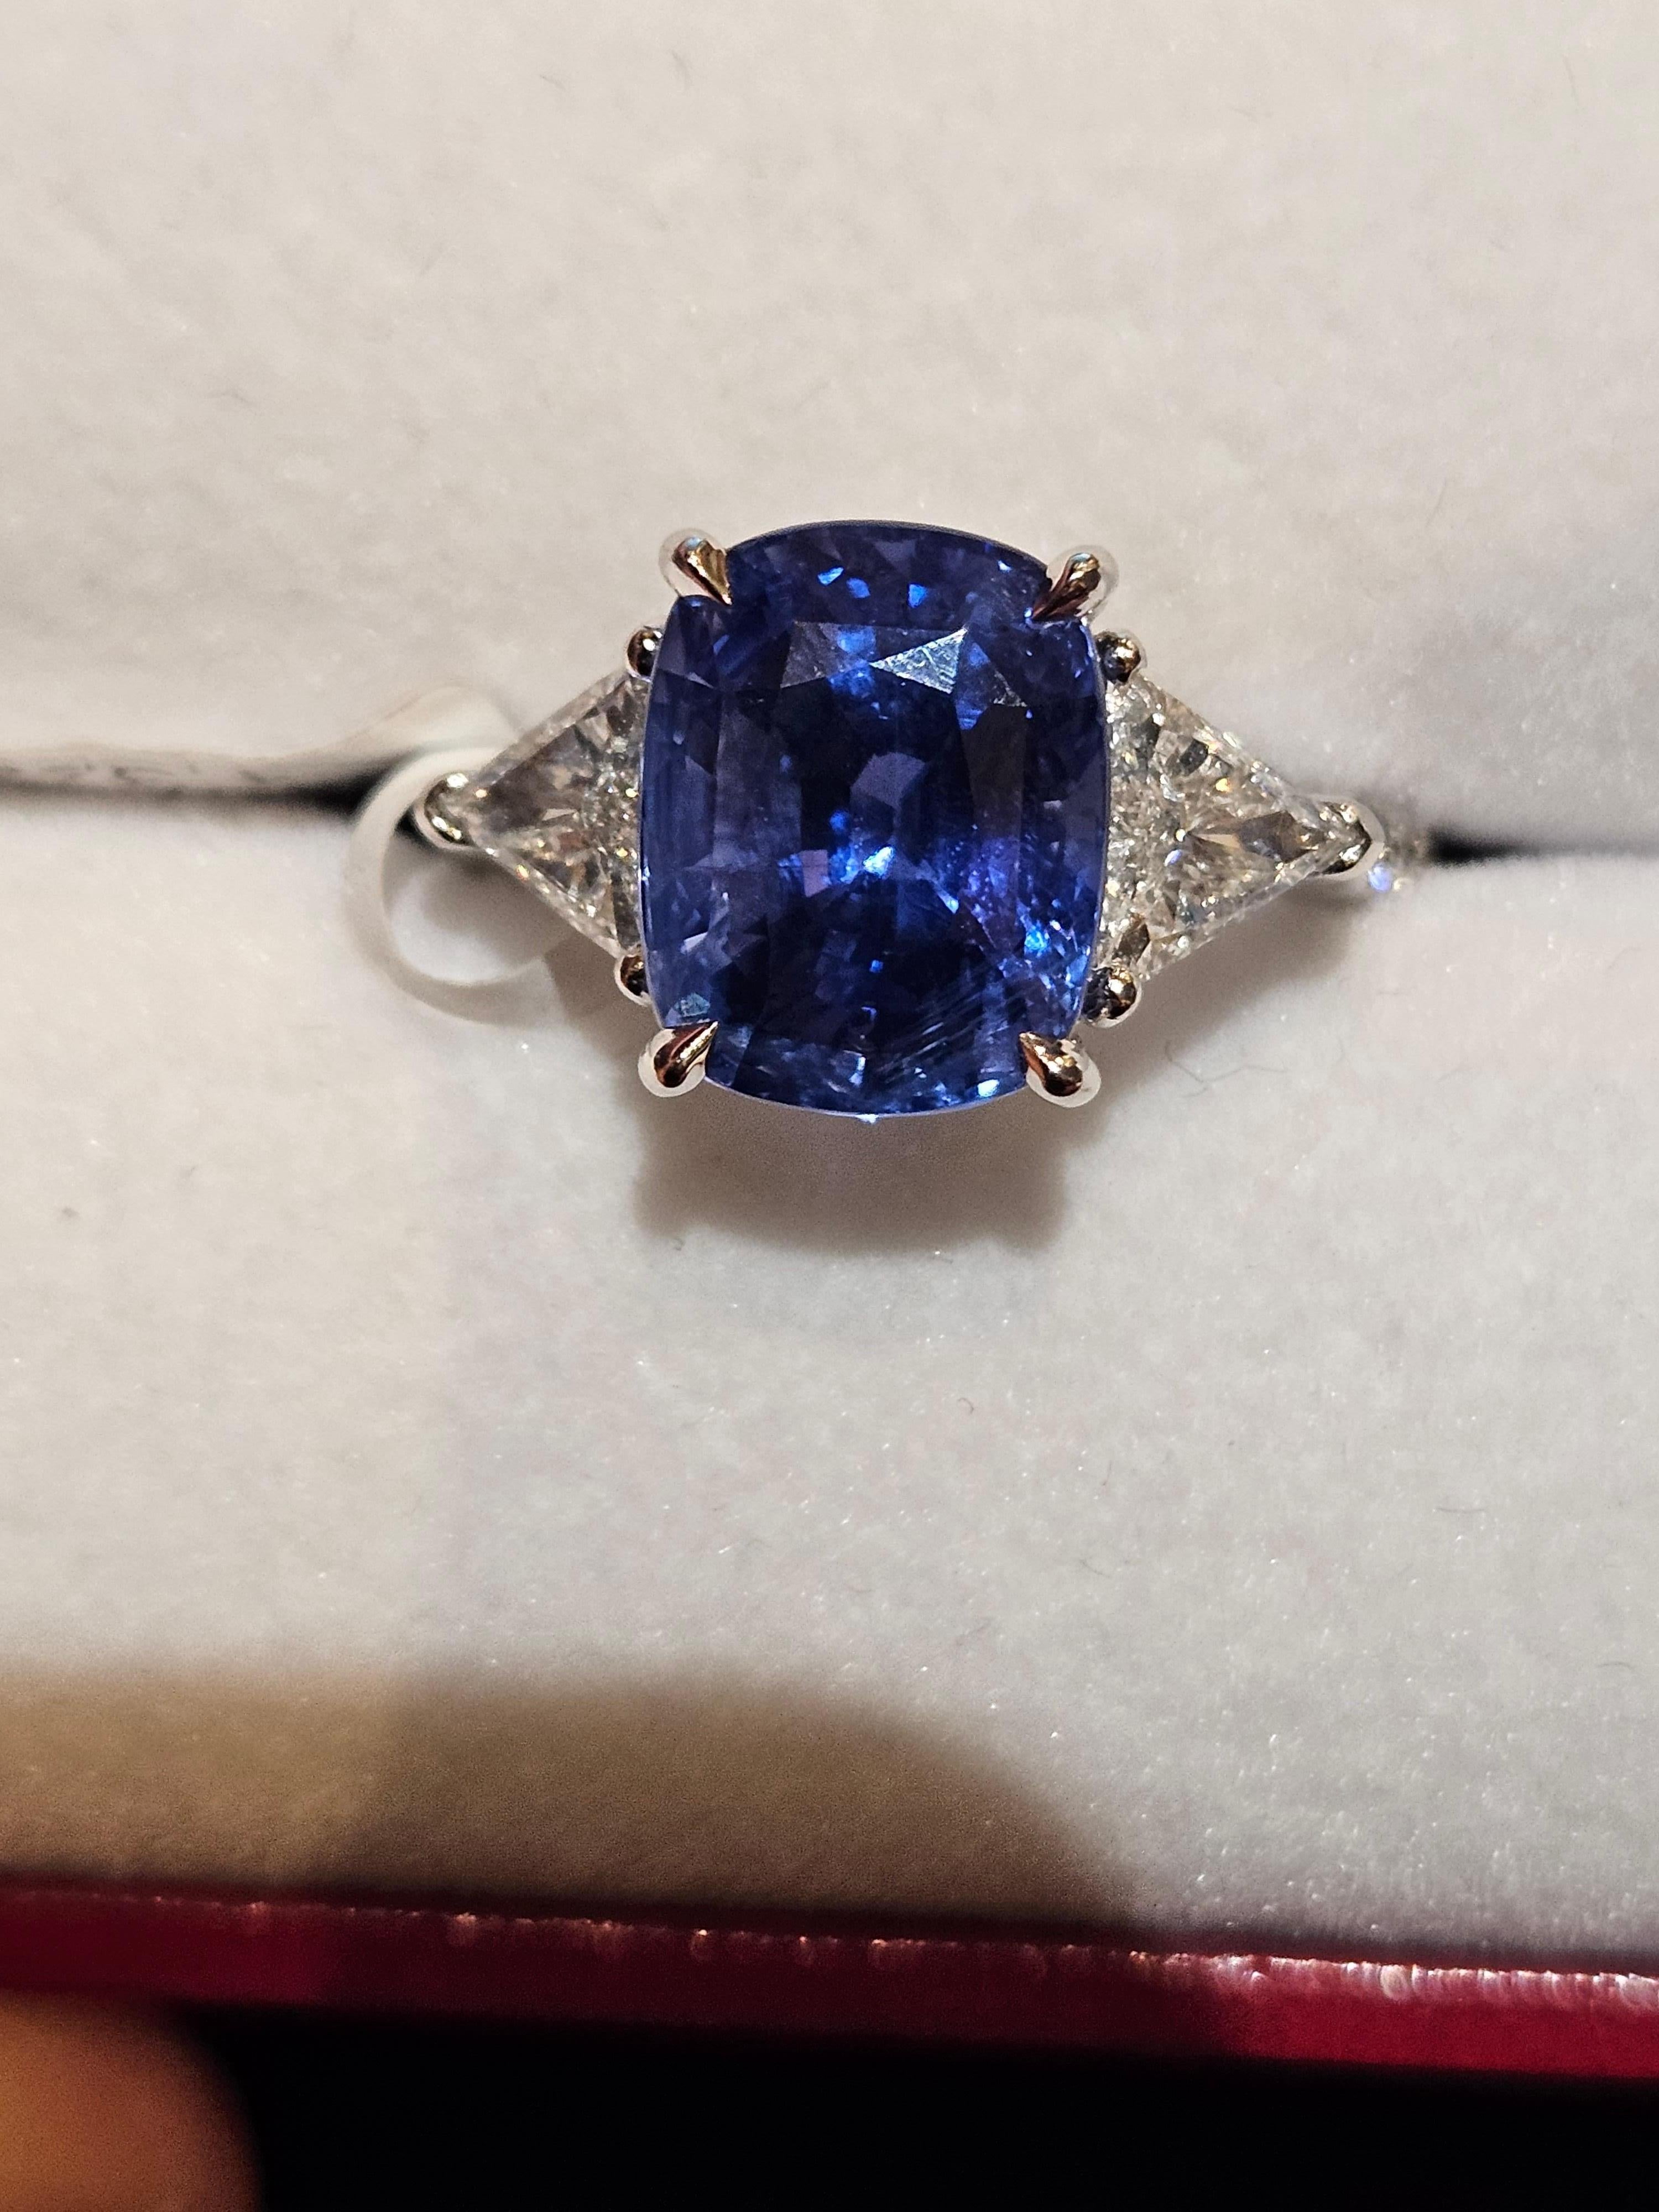 The Following Item we are offering is a Rare Important Spectacular and Brilliant 18KT Gold Large Gorgeous NATURAL Blue Ceylon Sapphire Diamond Ring. Ring consists of a Rare Fine Magnificent Rare NATURAL Blue Ceylon Sapphire surrounded with 2